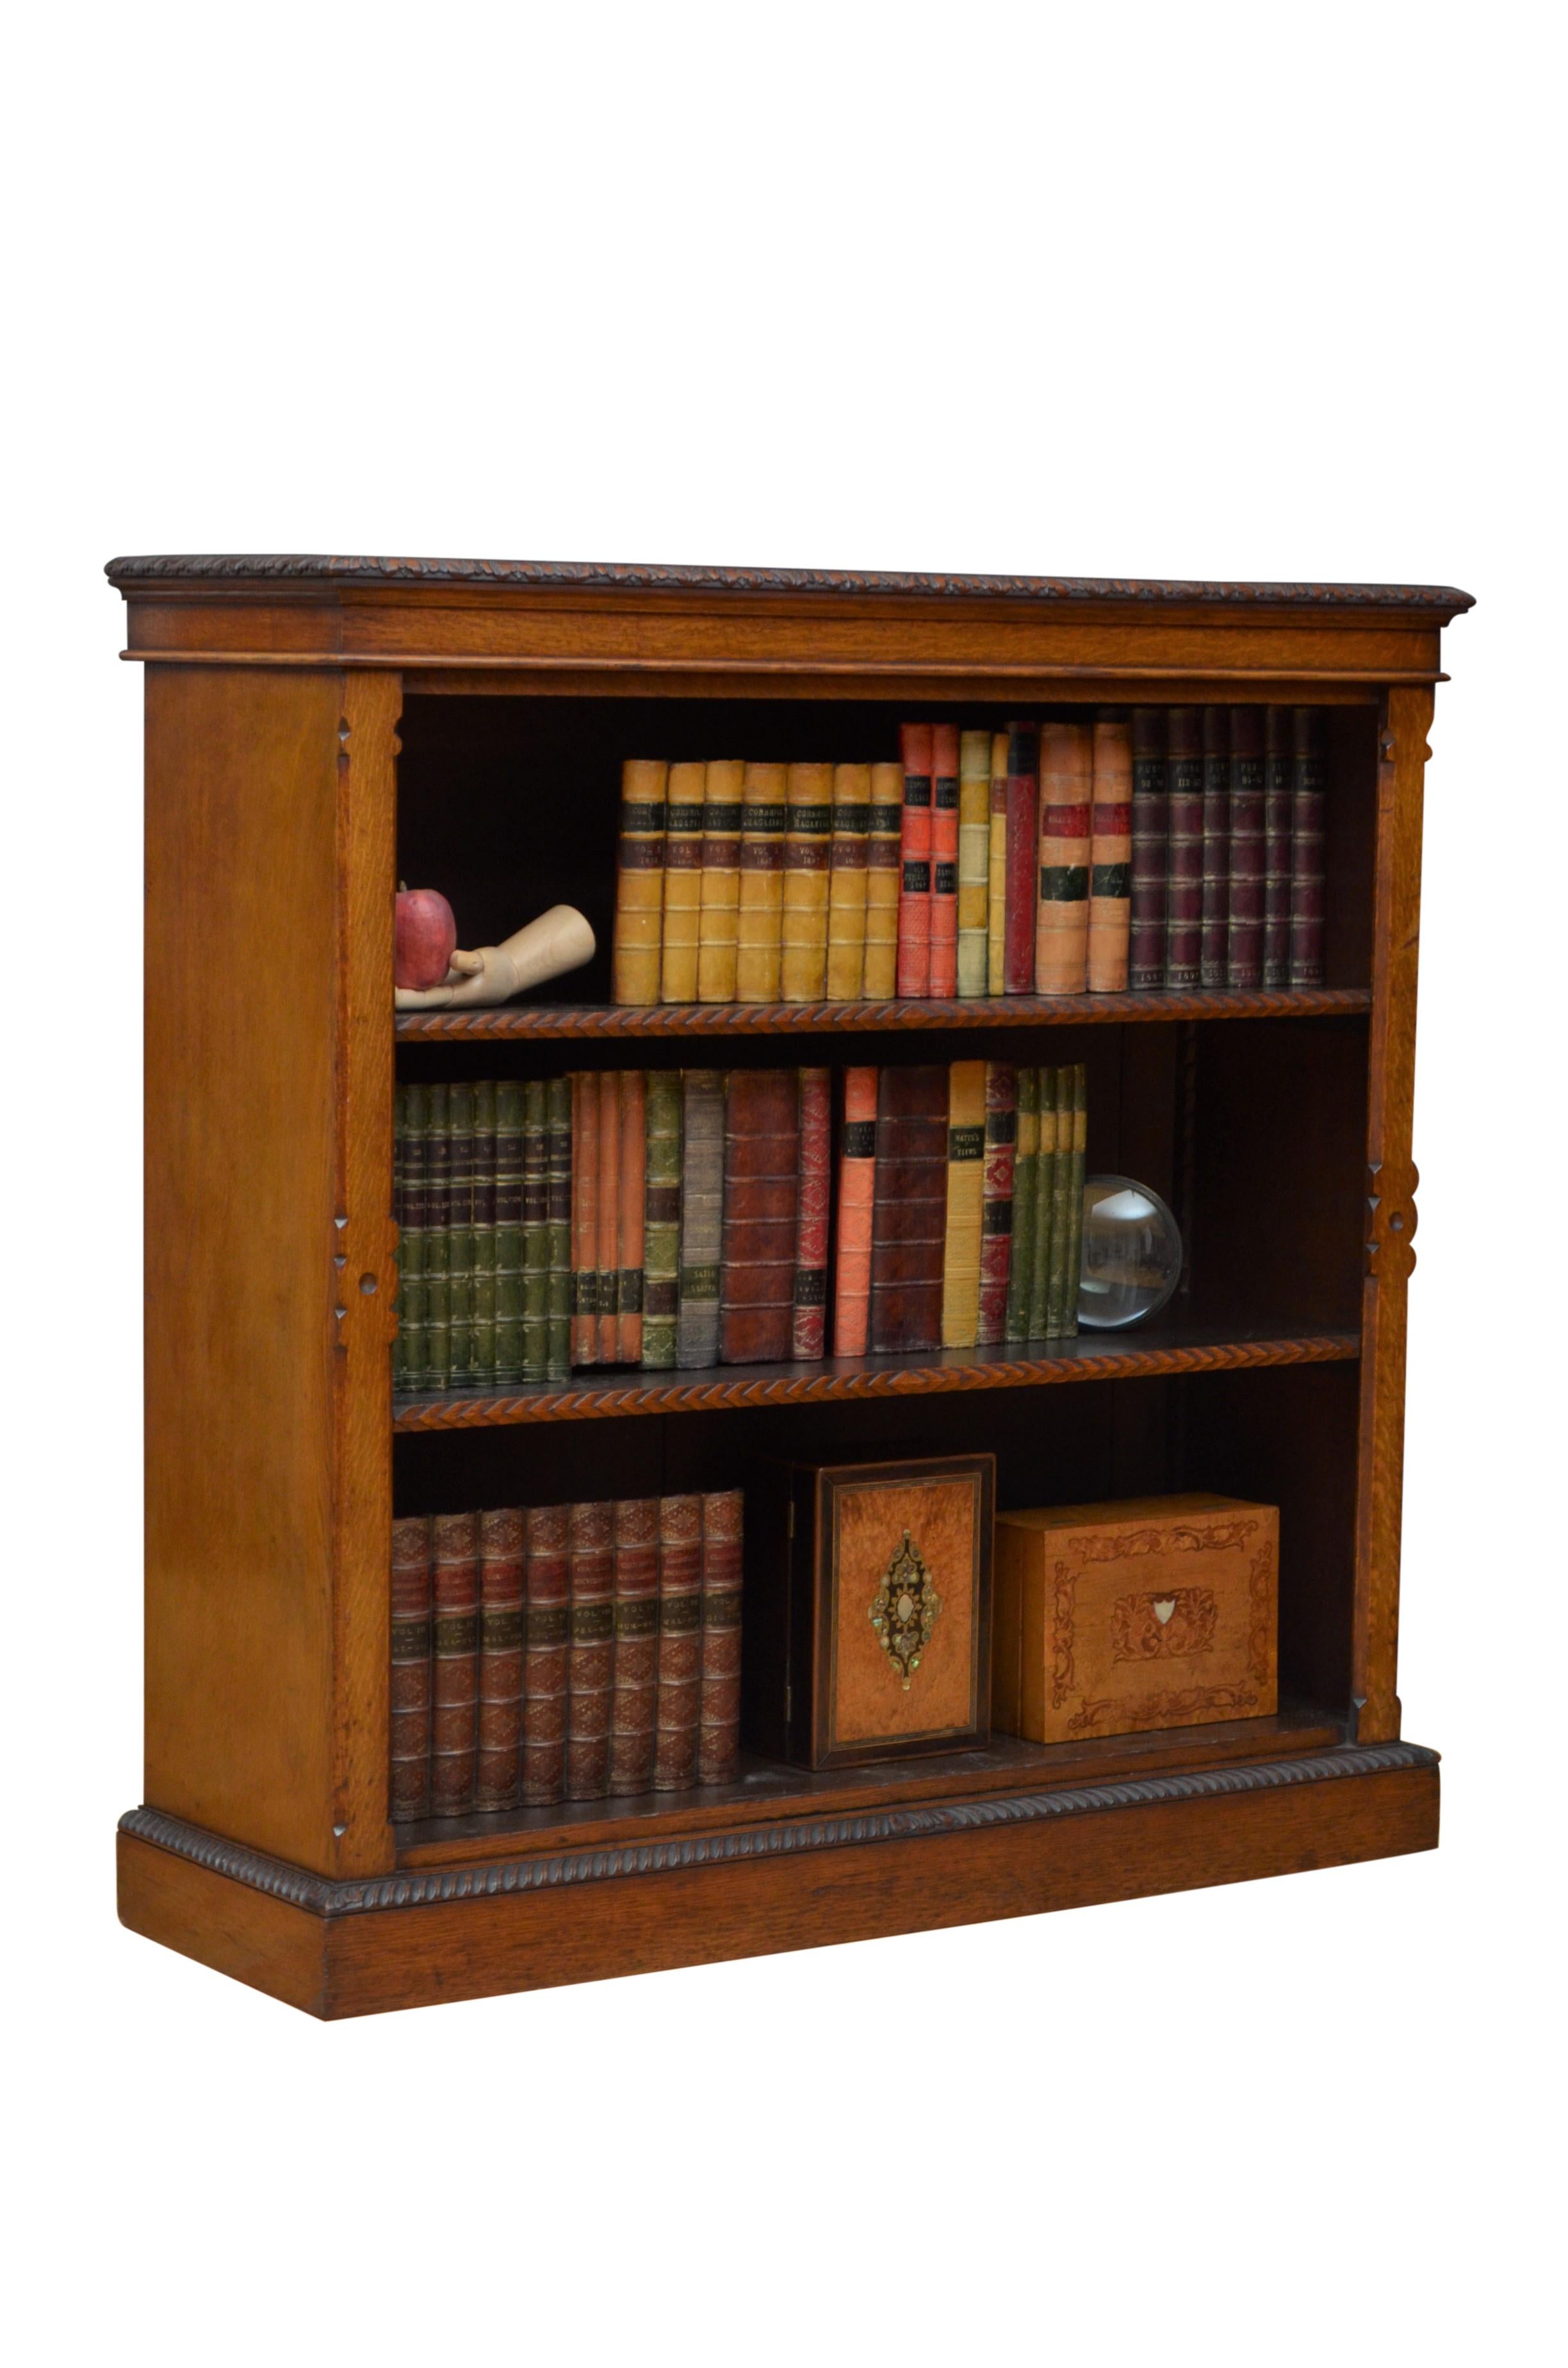  A quality Victorian open bookcase in solid oak, having attractive top with finely carved edge above two height adjustable shelves also with carved edge, flanked by decorative, canted pilasters, all standing on carved plinth base. This antique